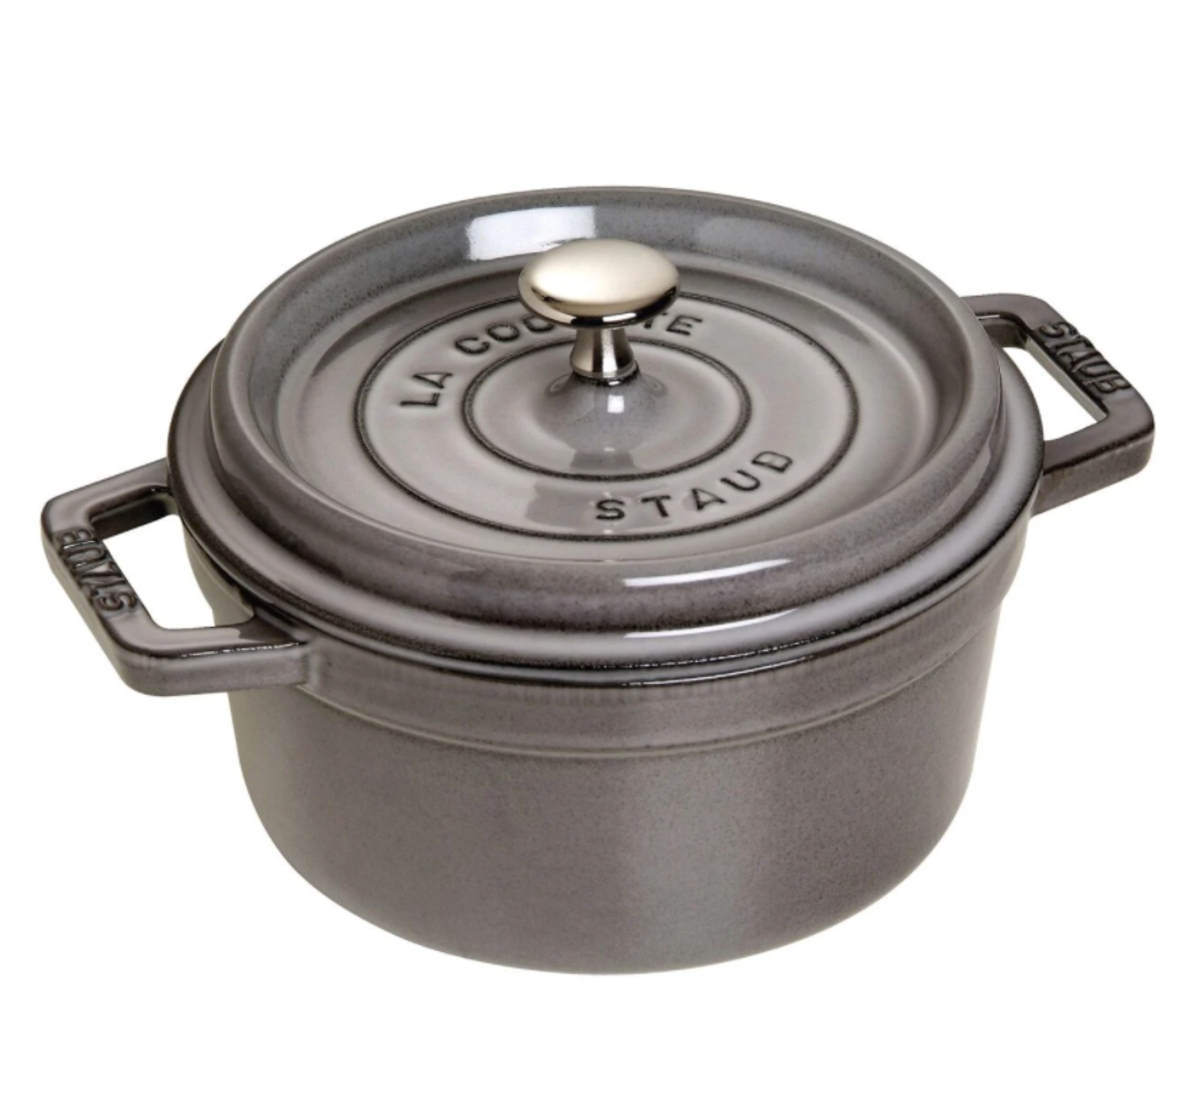 Staub 2.75 QT enameled Cast Iron Cocotte in grey.